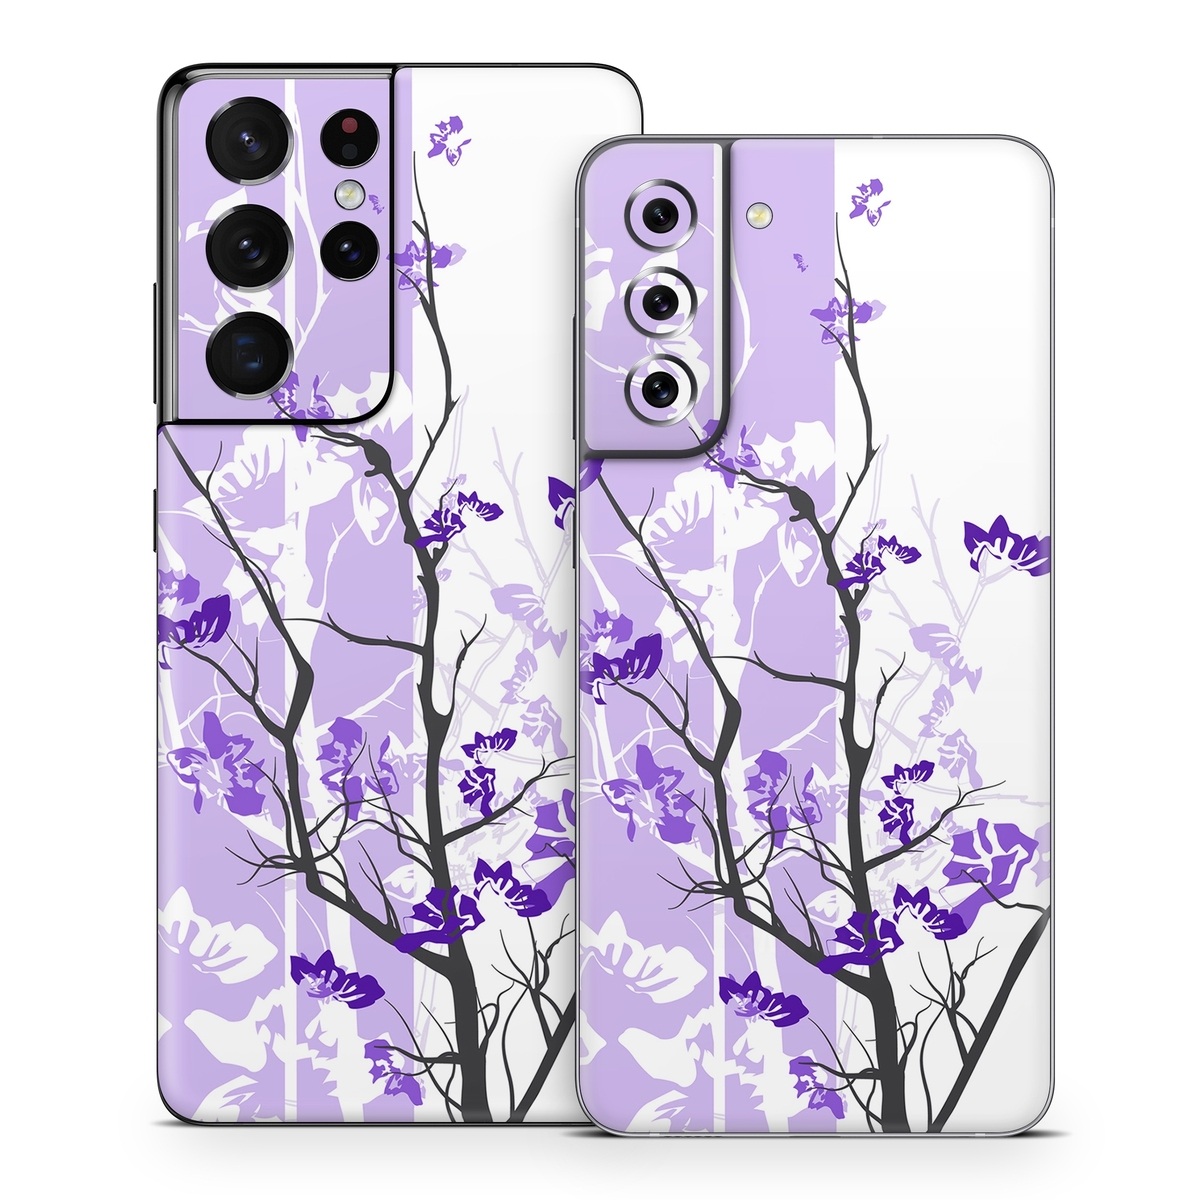 Samsung Galaxy S21 Series Skin design of Branch, Purple, Violet, Lilac, Lavender, Plant, Twig, Flower, Tree, Wildflower, with white, purple, gray, pink, black colors